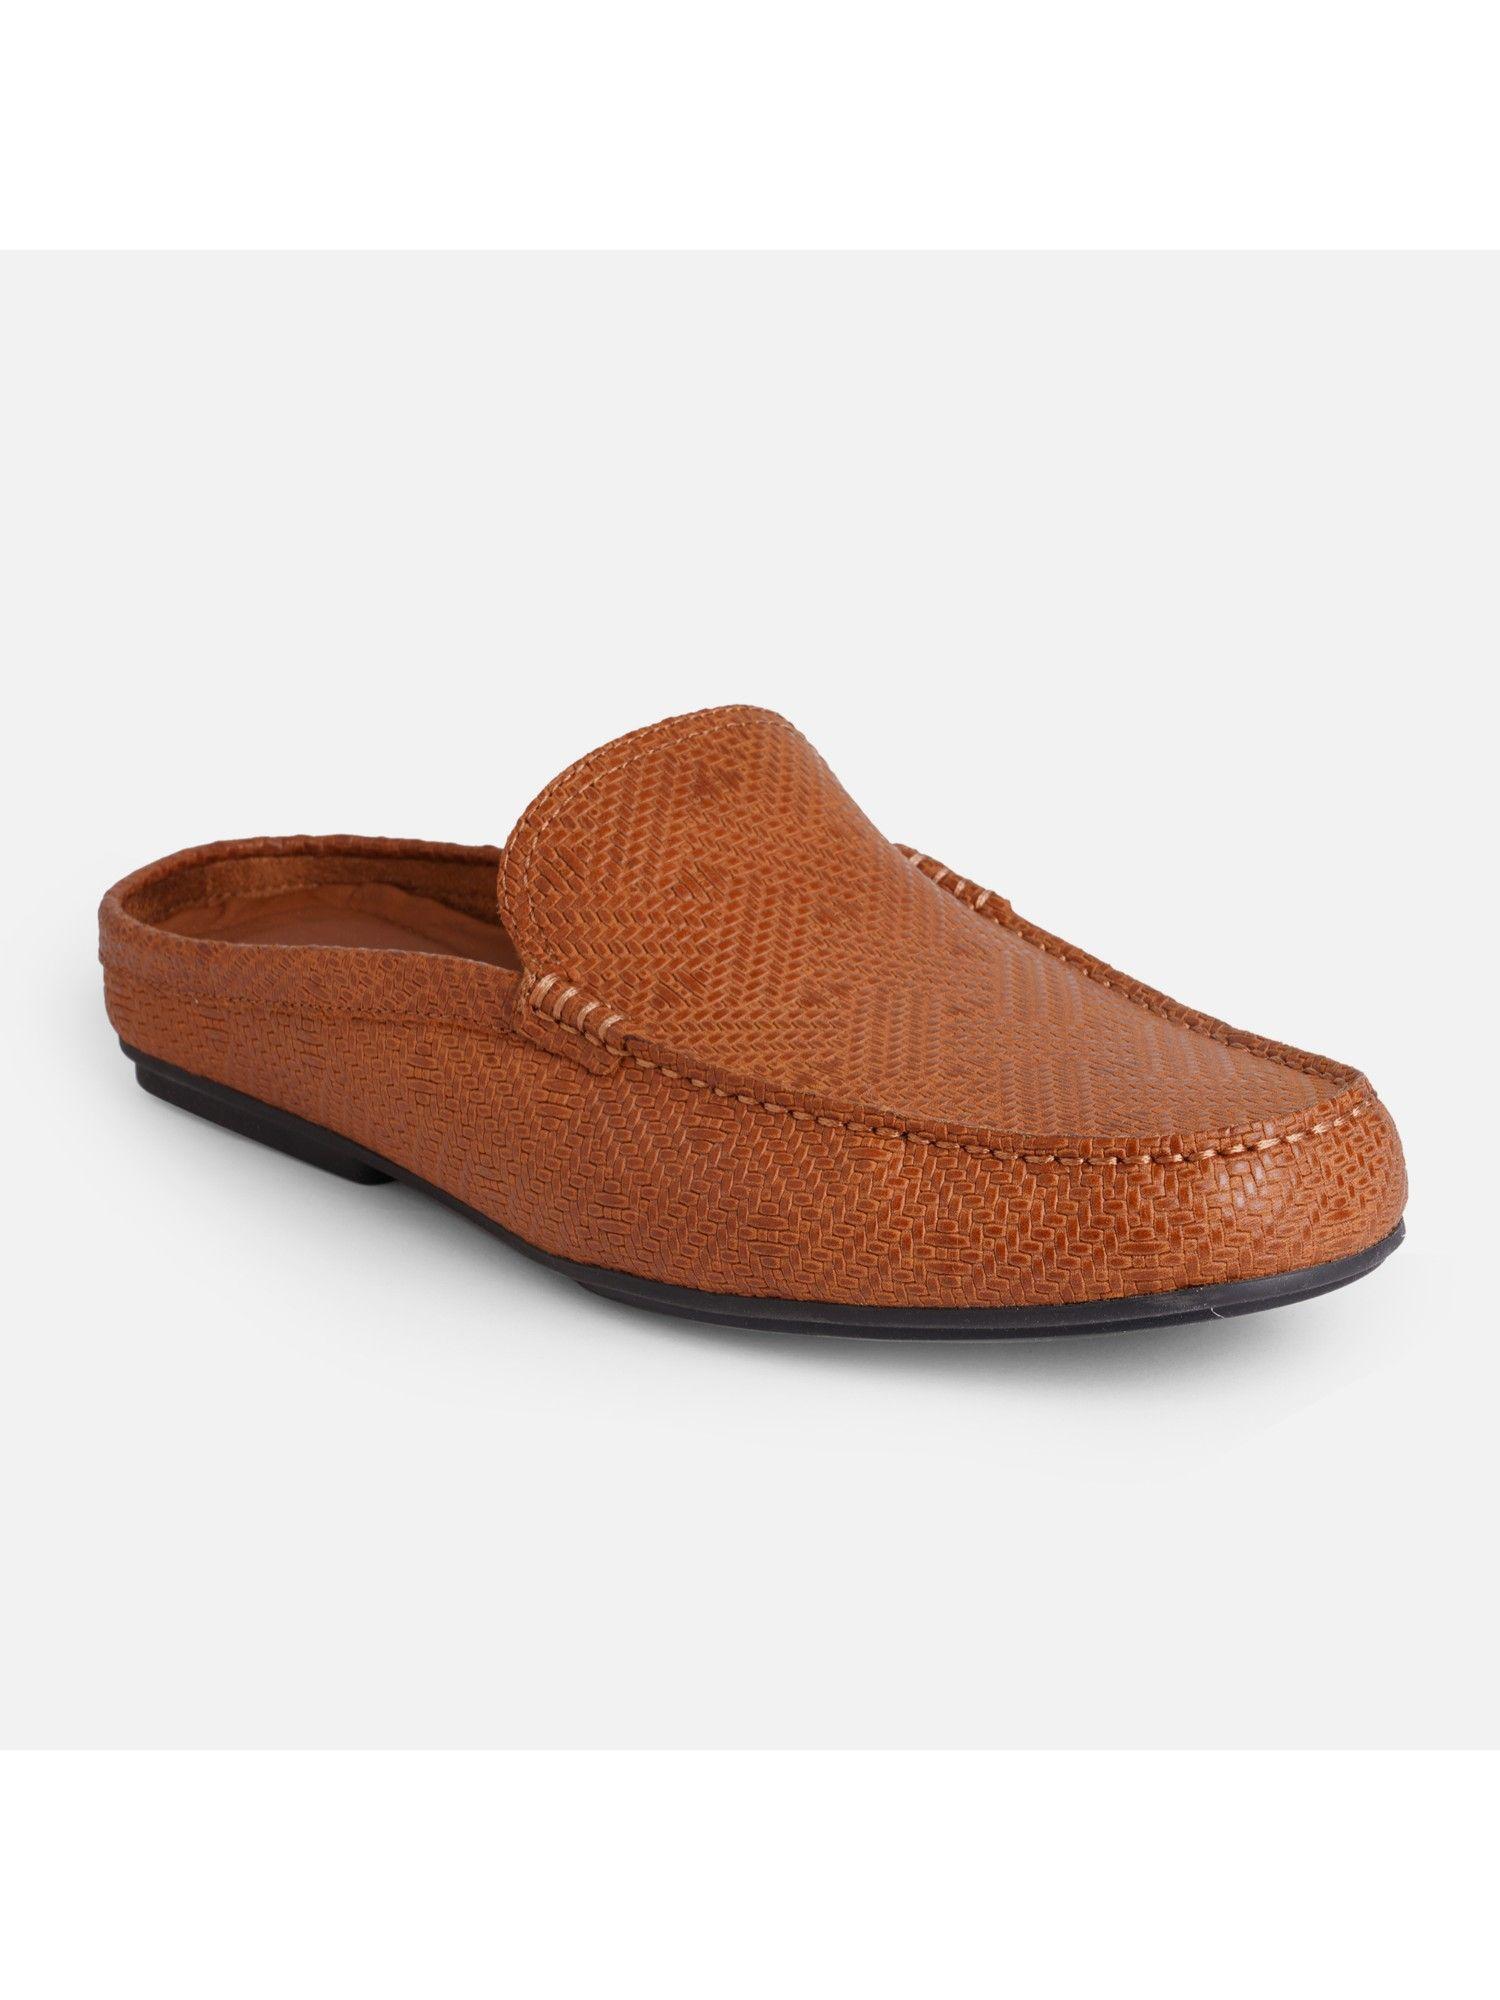 sereno leather tan textured mules